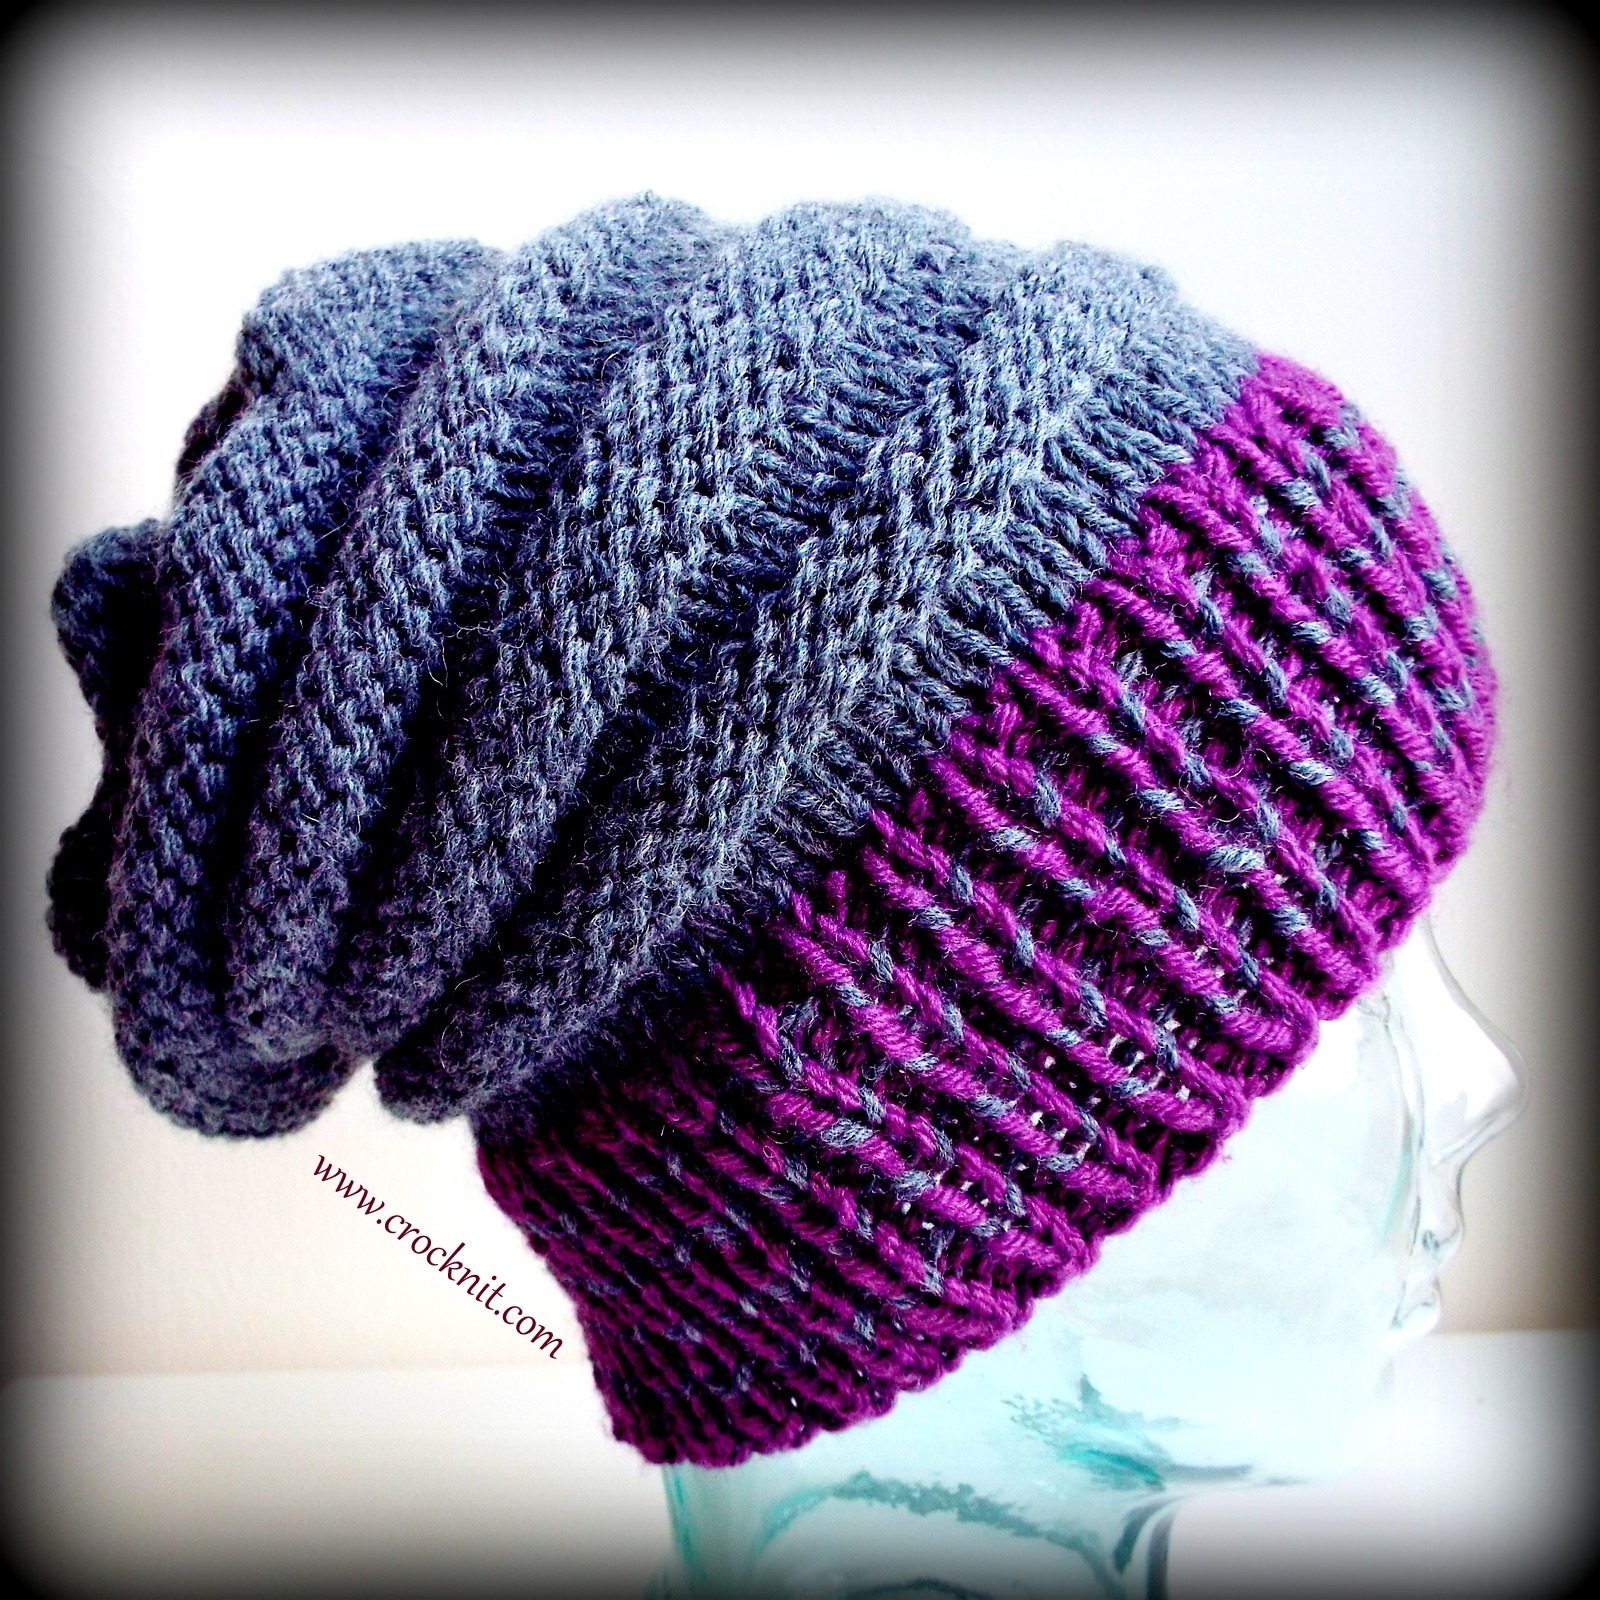 Knitted Slouchy Hat Pattern Microcknit Creations Buzz Buzz Knit Slouchy Hat